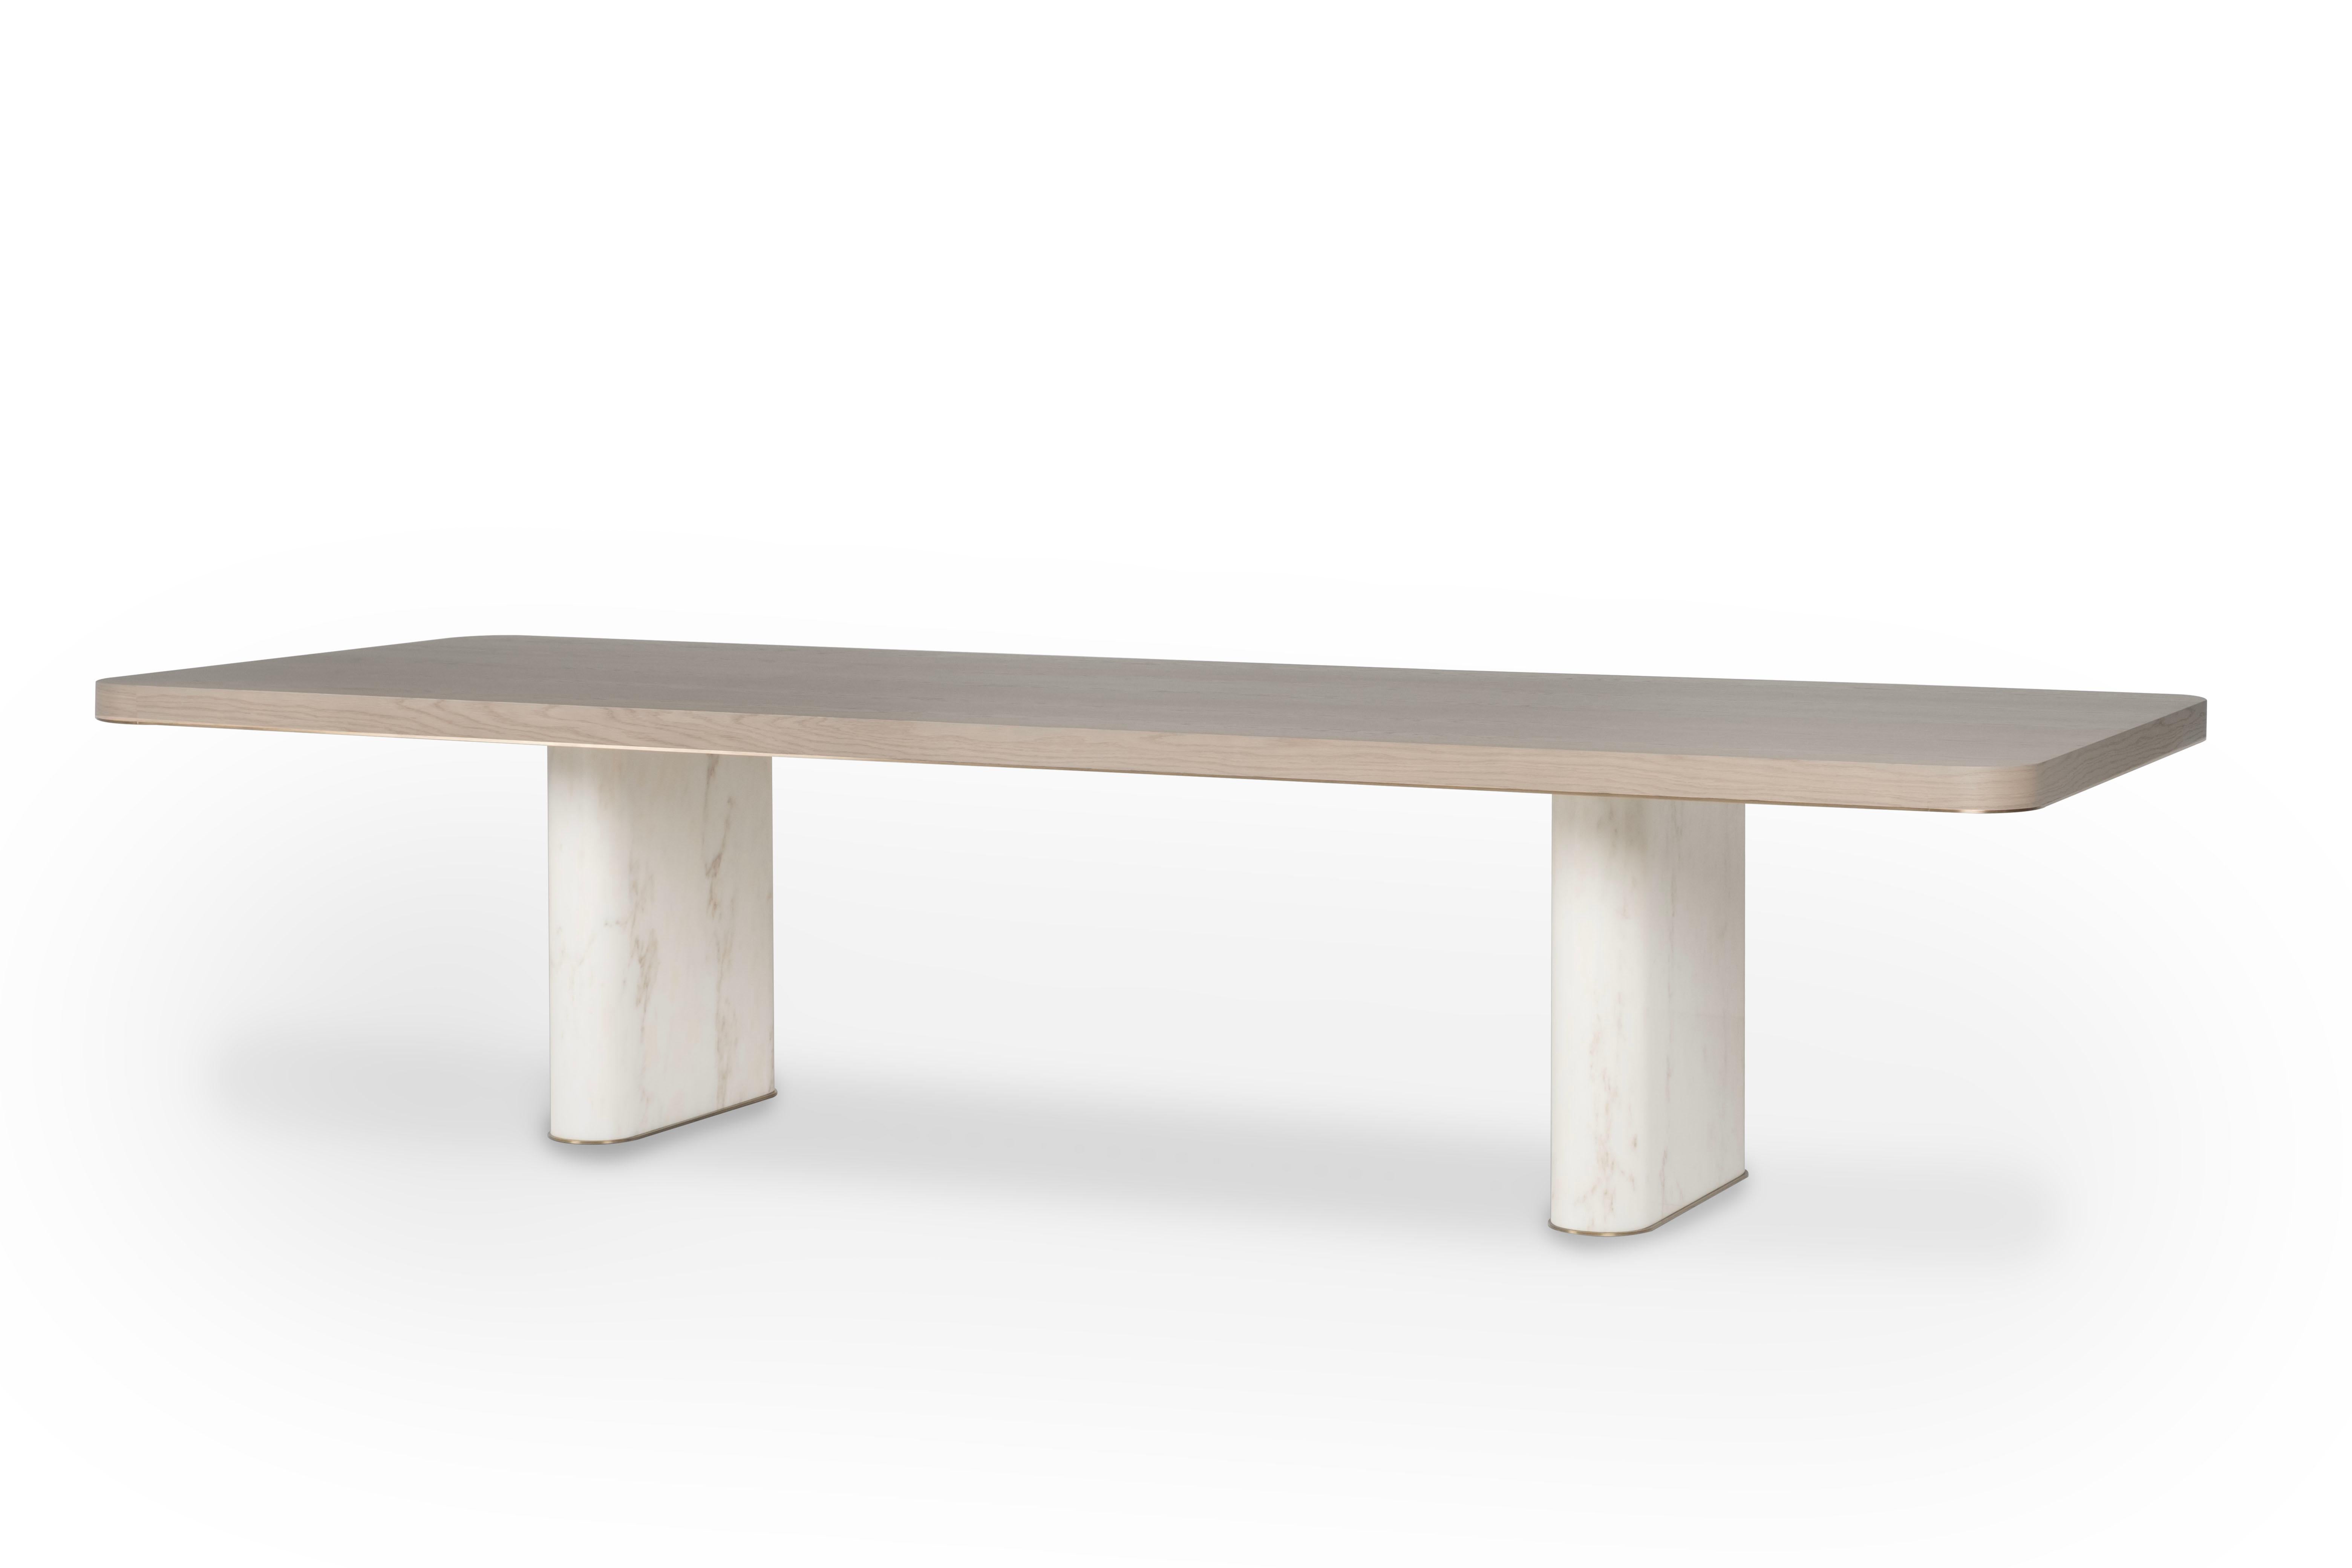 Fall Dining Table, Contemporary Collection, Handcrafted in Portugal - Europe by Greenapple.

A modern allure emerges with Fall dining table, enhancing any dining space by taking the exceptional craftmanship and design to a new level.

The